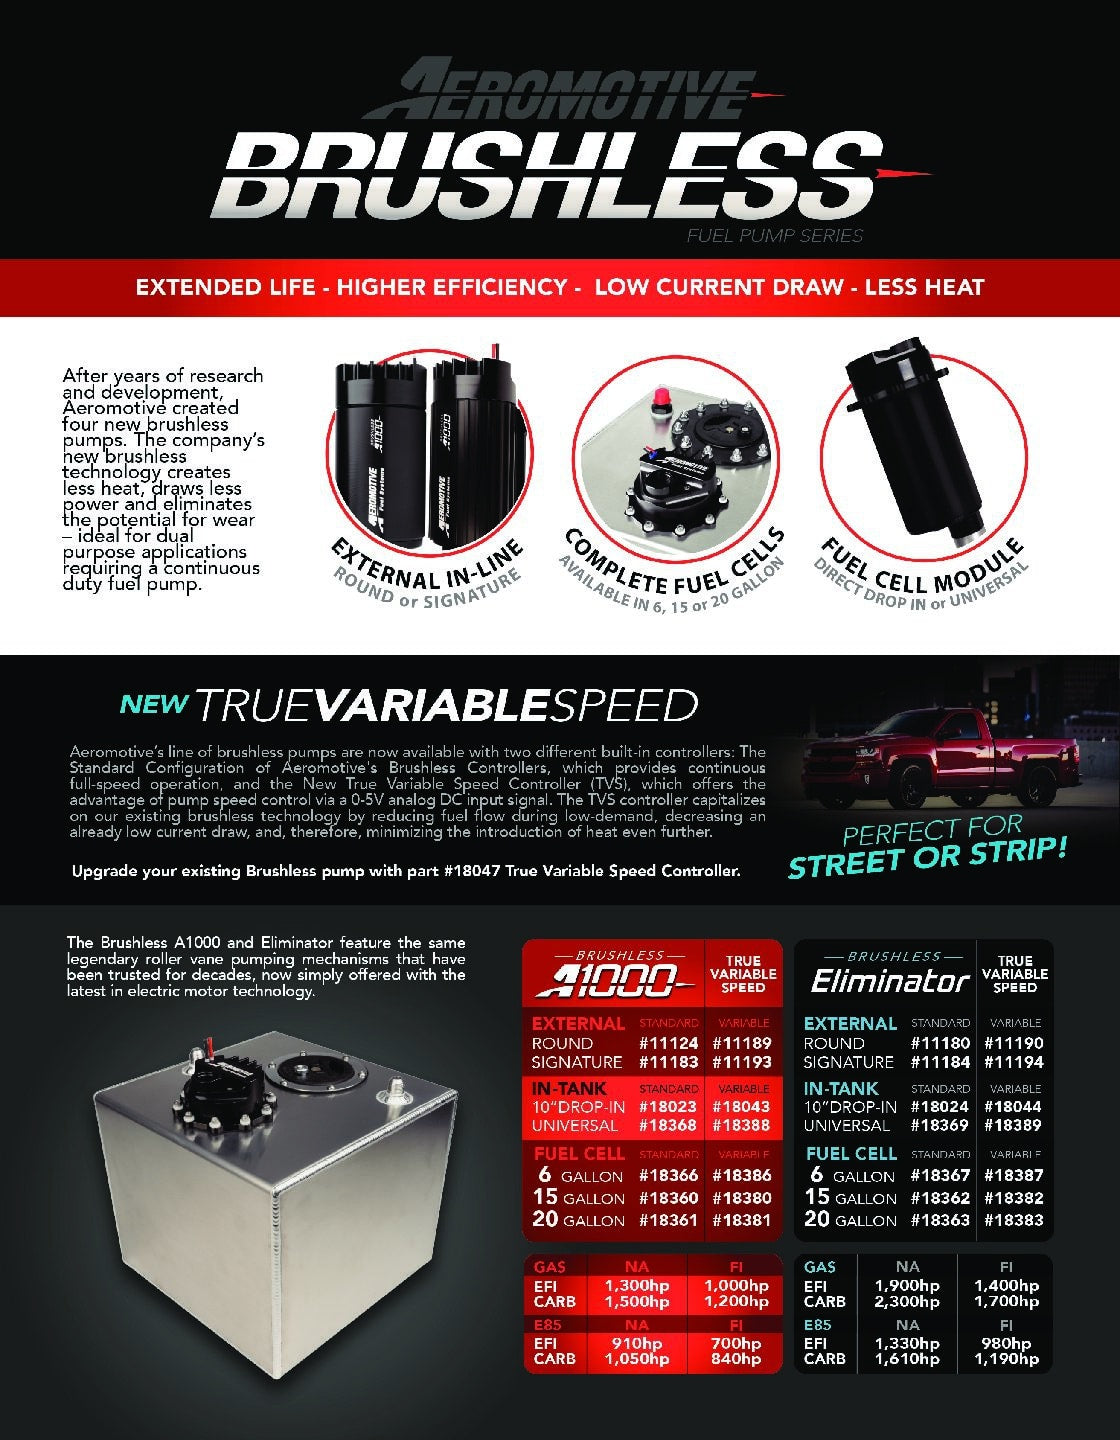 Brushless In-Line Eliminator Fuel Pump with Variable Speed Controller